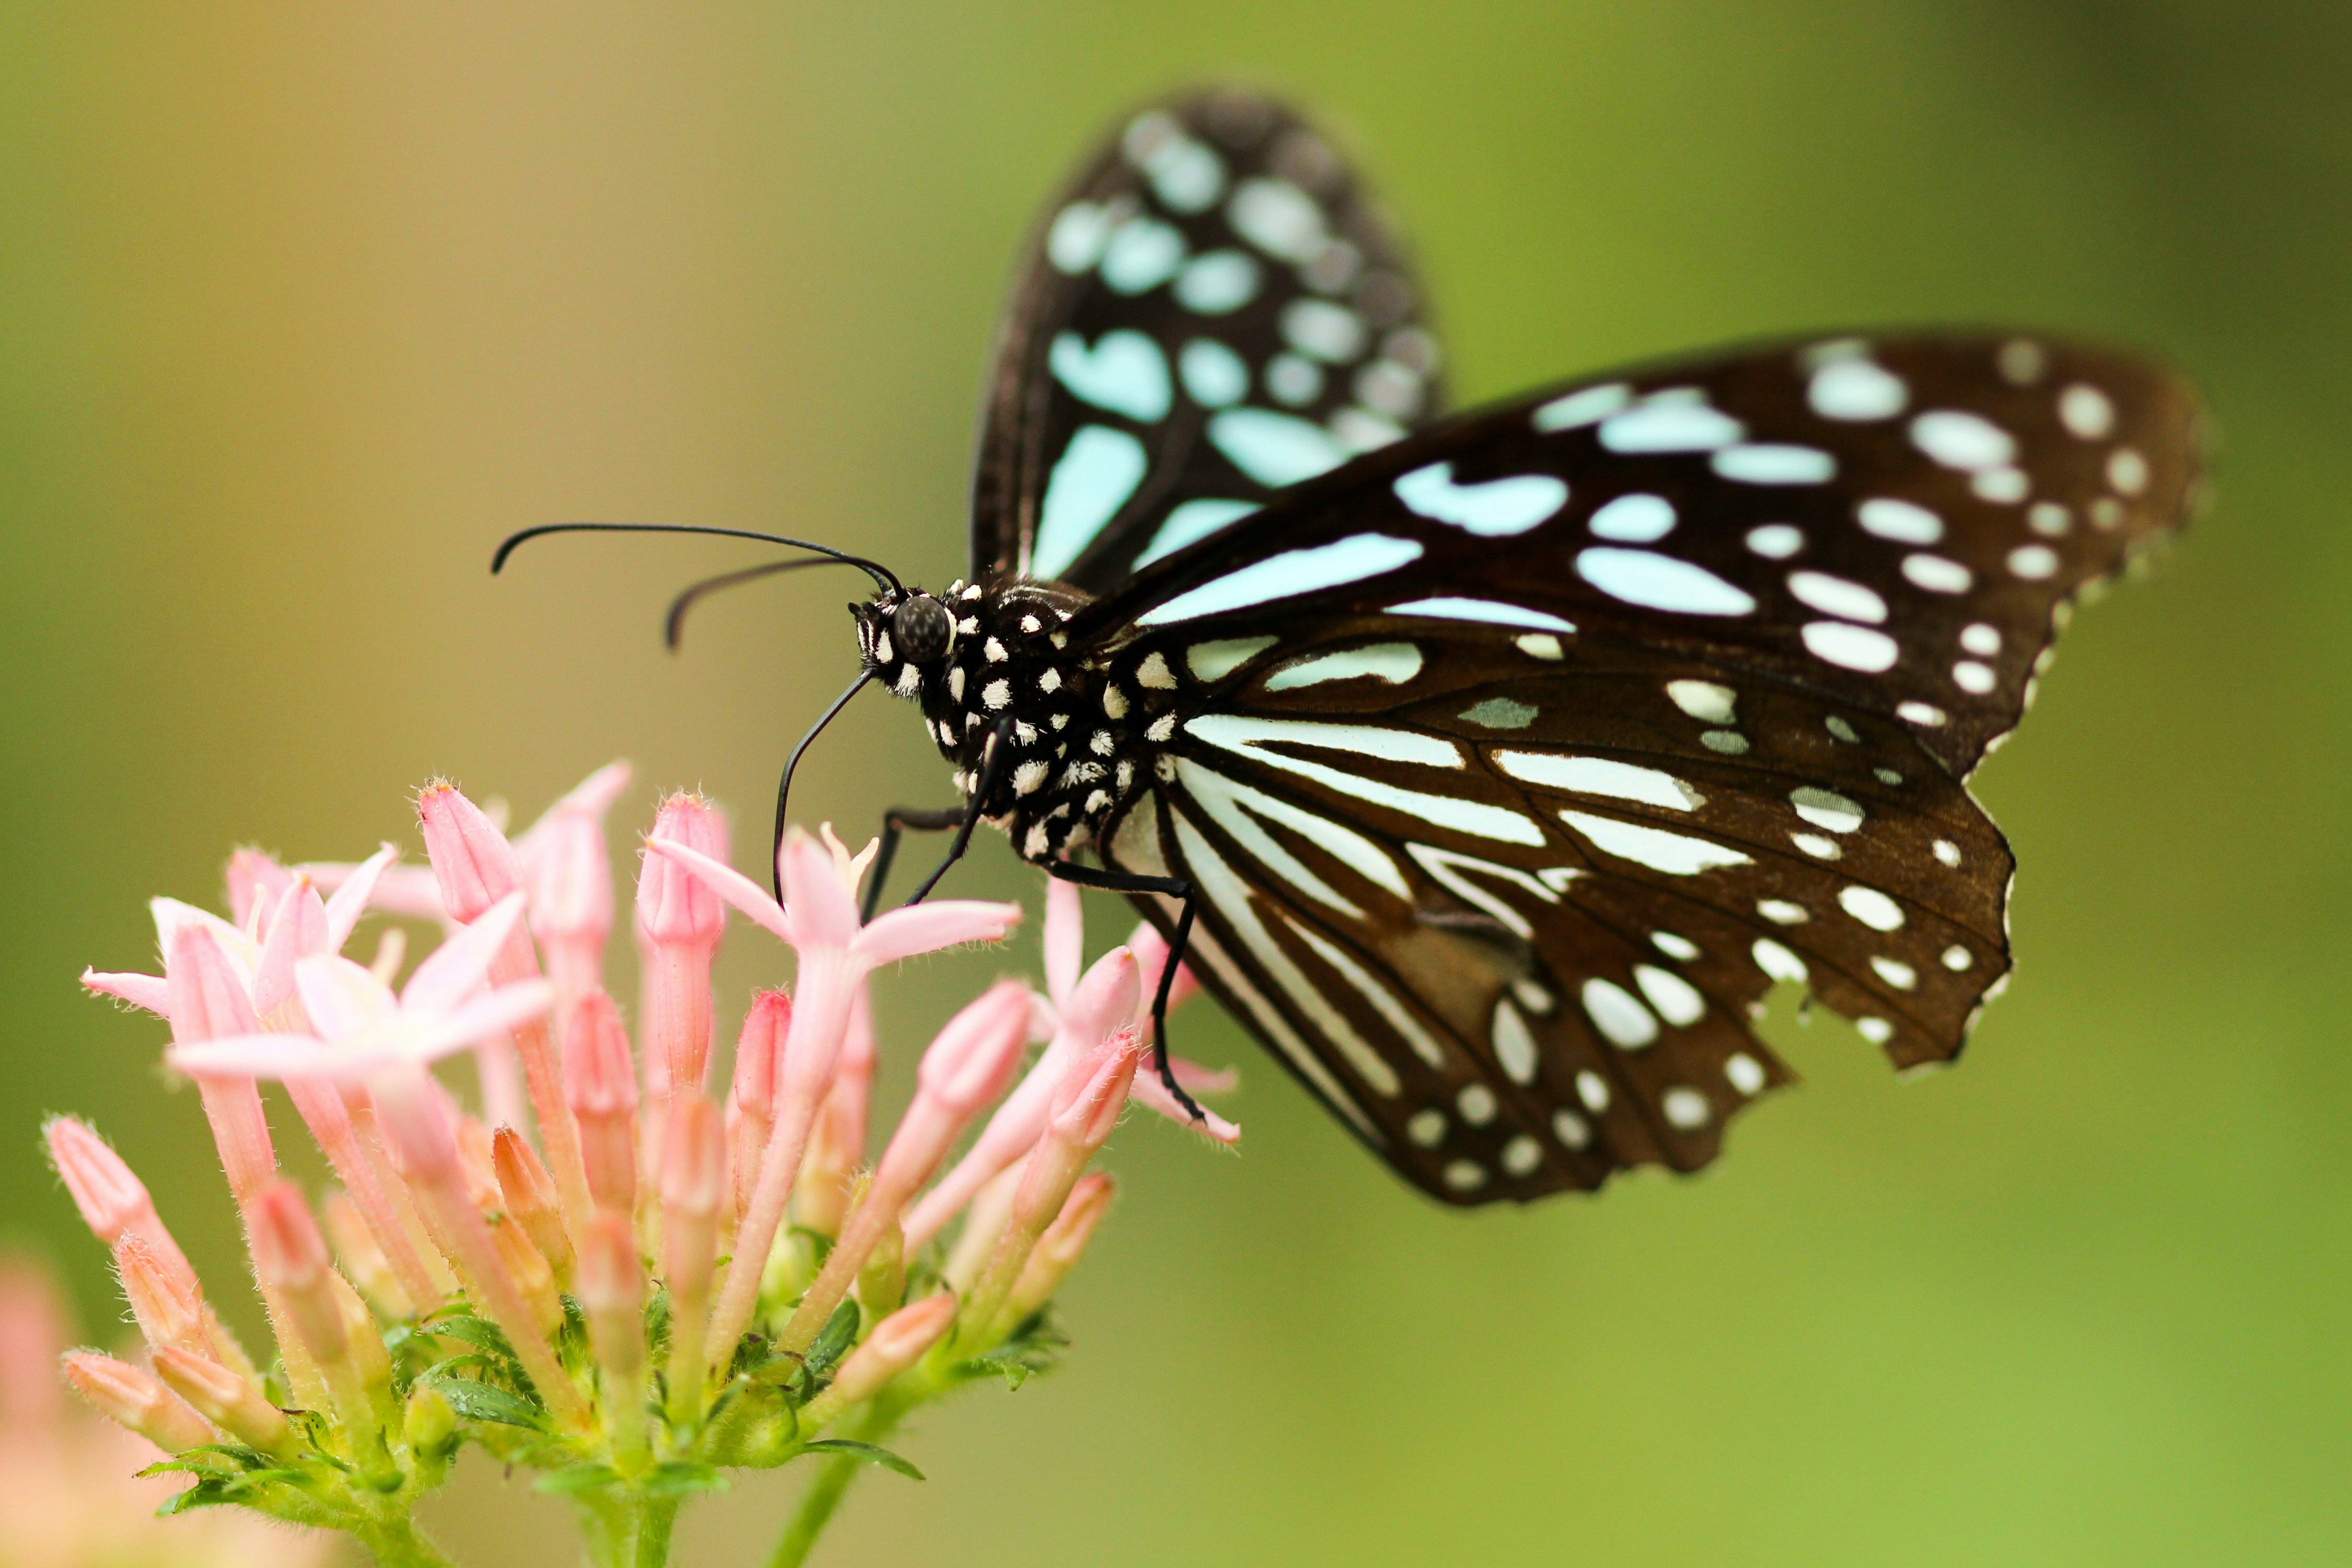 A black and white butterfly on a pink flower.